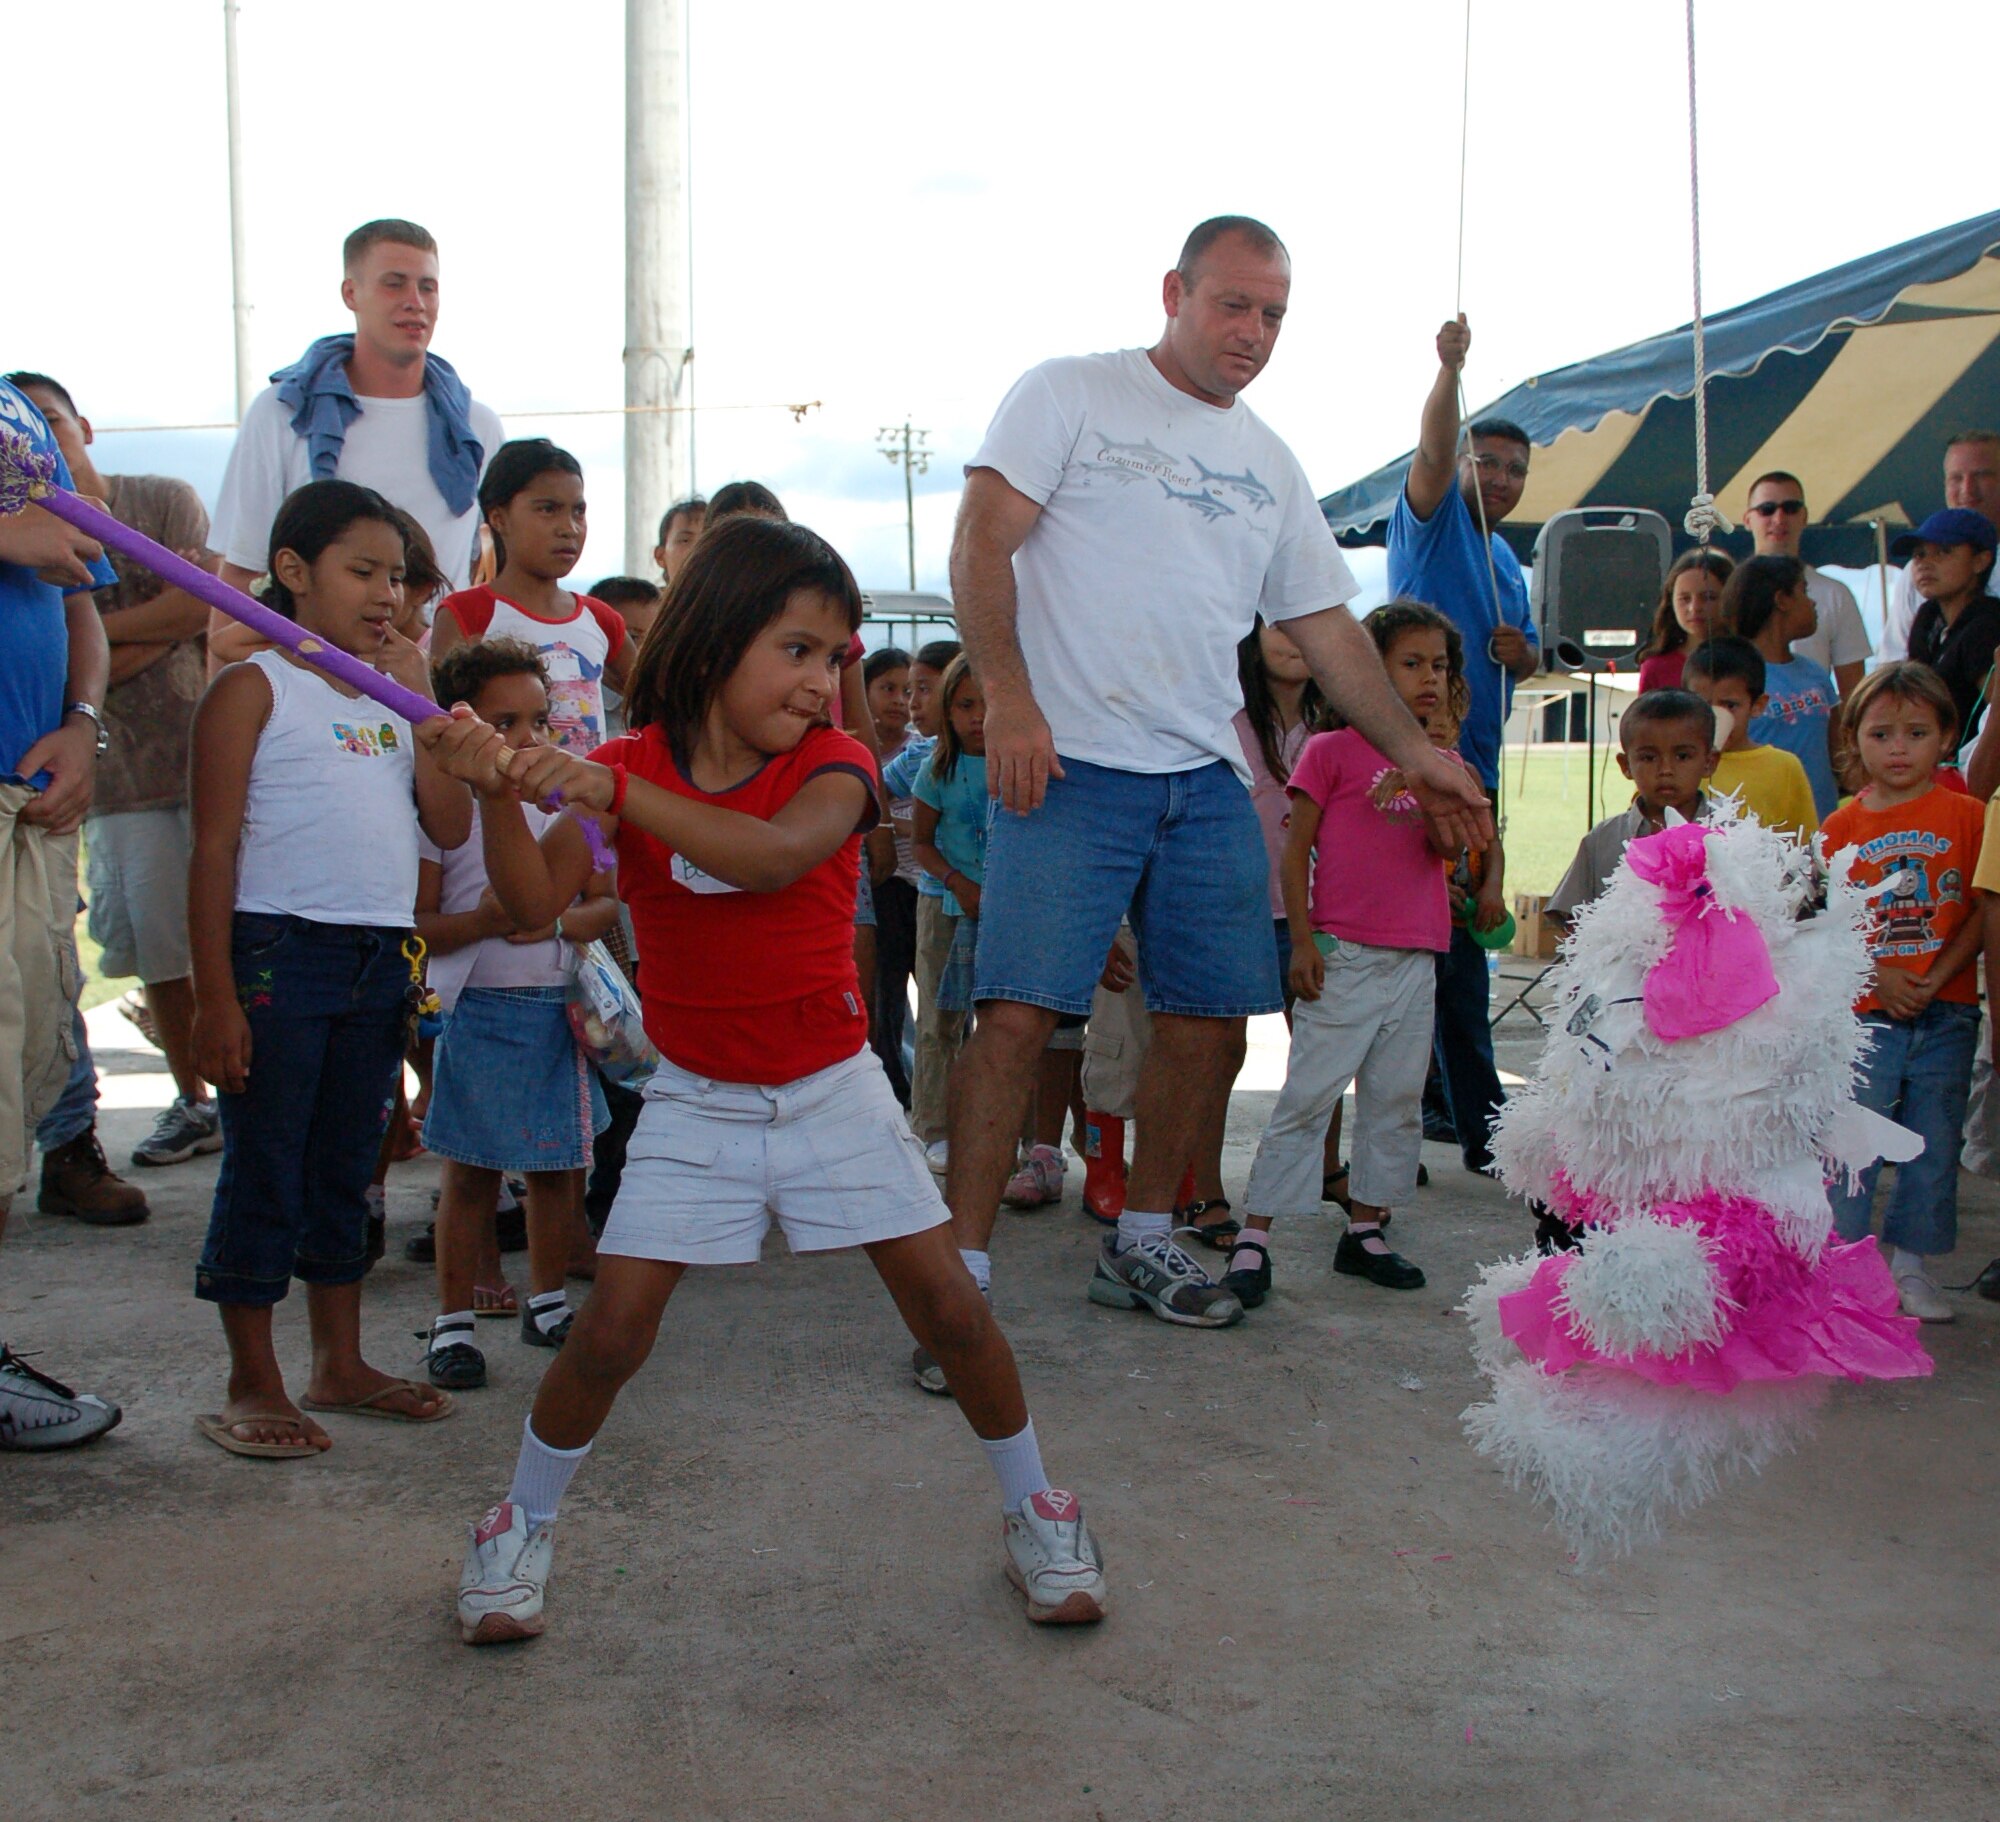 SOTO CANO AIR BASE, Honduras – A young Honduran girl winds up to deliver a crushing blow to a piñata while her friends cheer her on and wait anxiously for their turn to take a swing at it.  Approximately 90 children from Nuestra Señora de Guadalupe Children's Home in Comayagua came out to enjoy the Annual Kids Day celebration September 22.  (U.S. Air Force photo by Staff Sgt. Austin M. May)